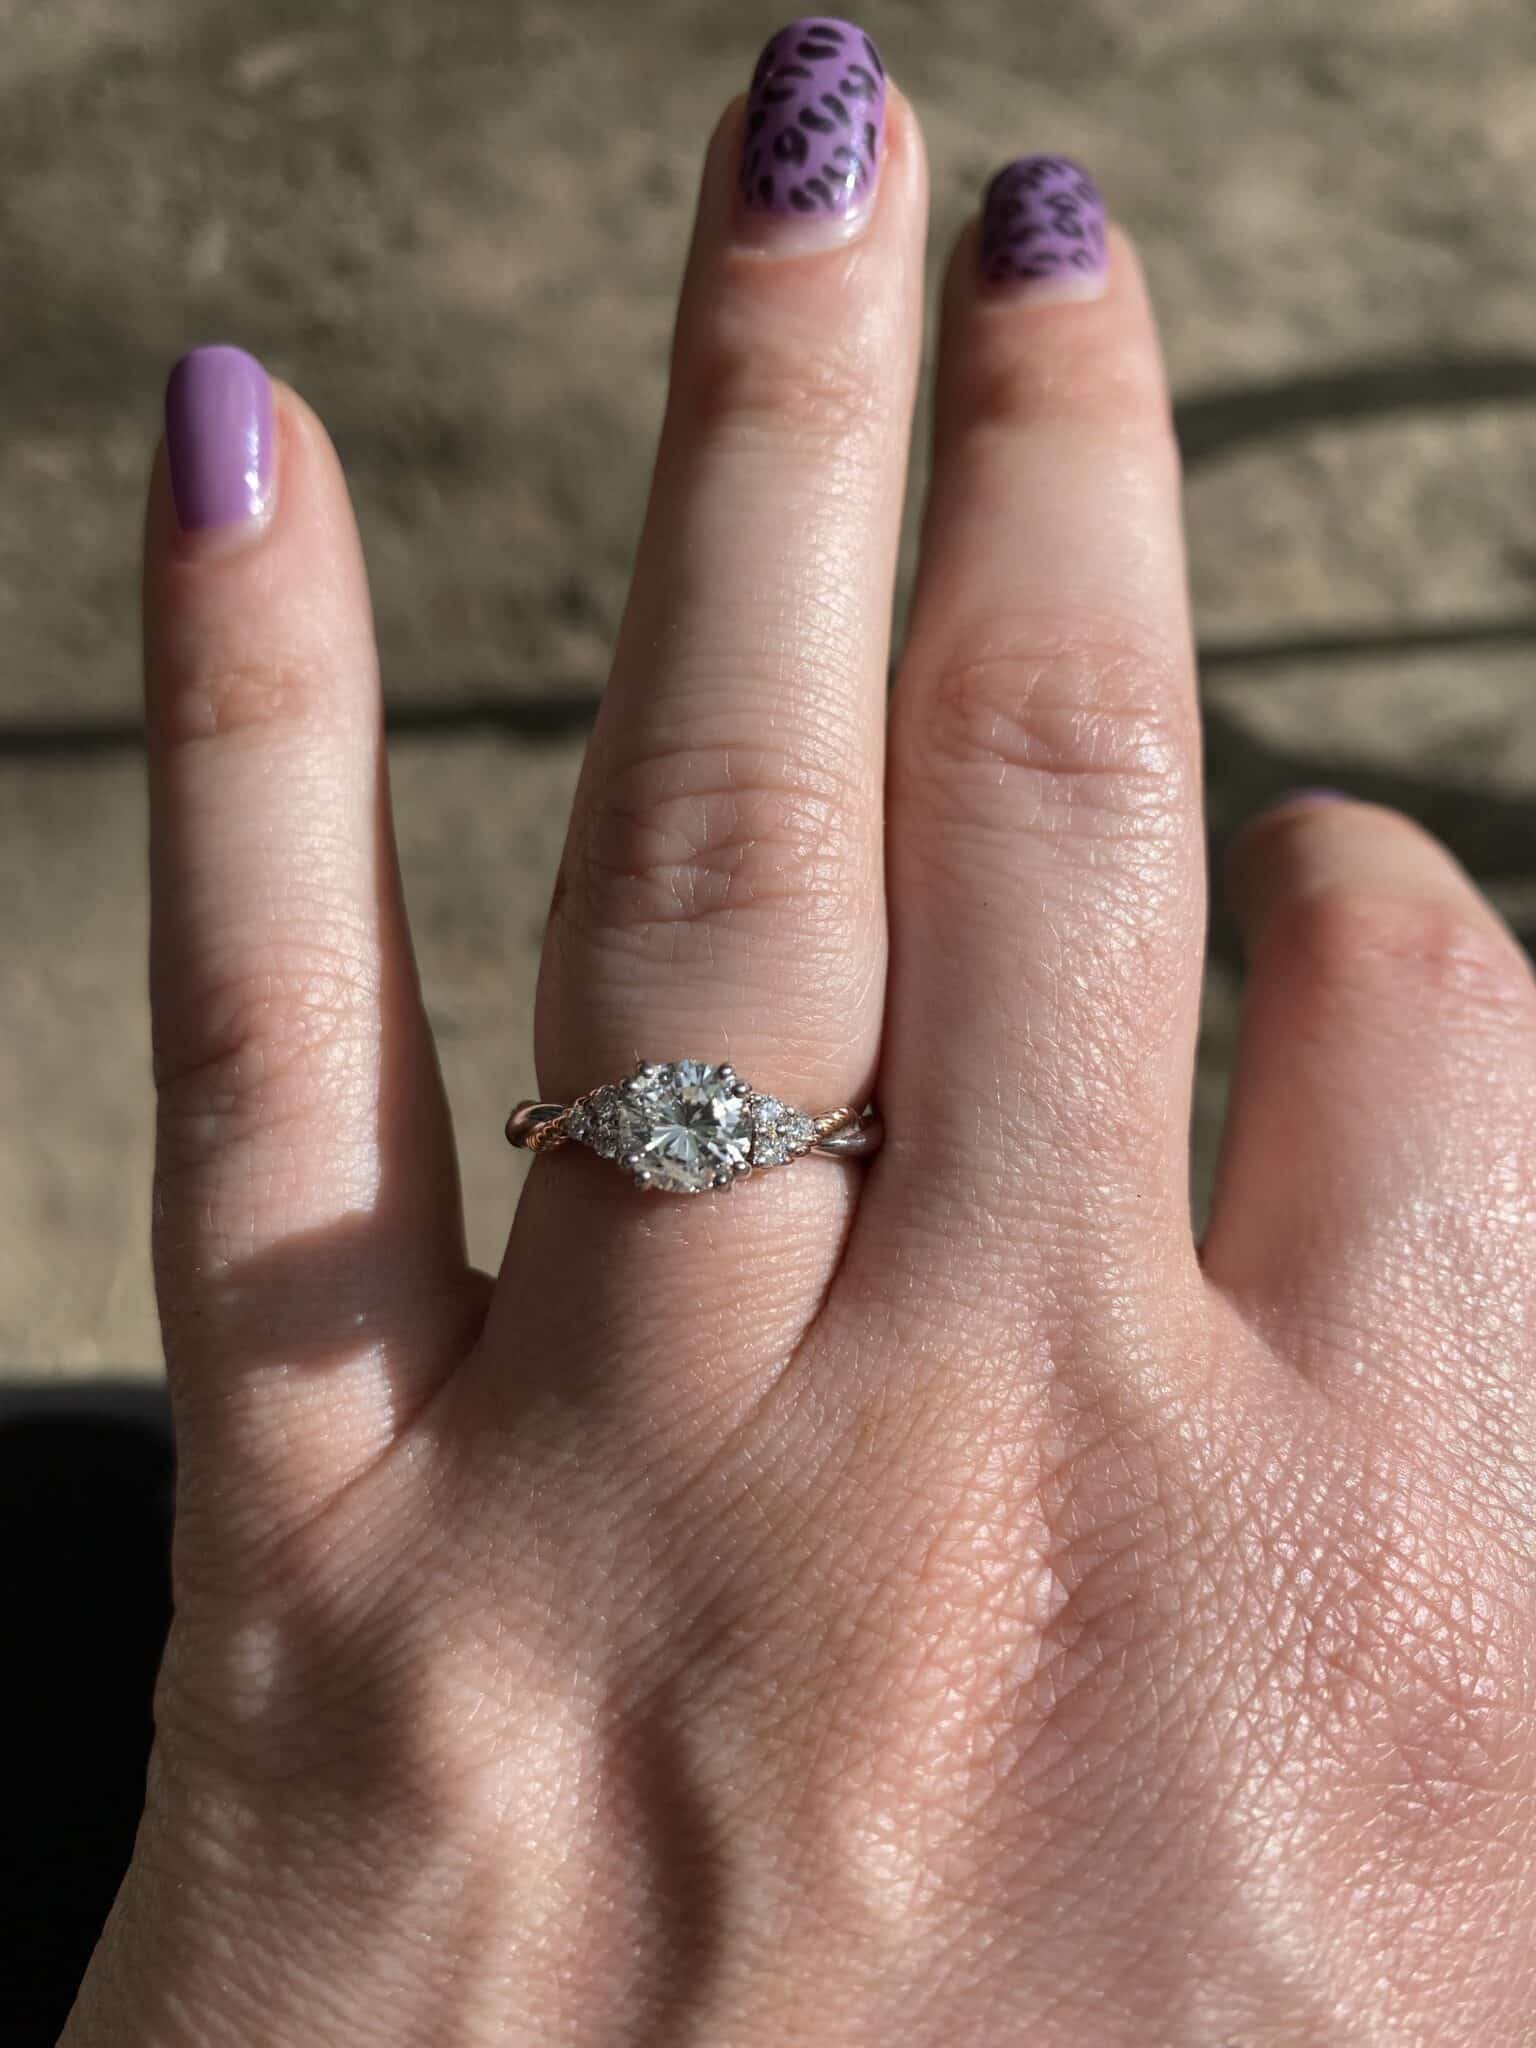 close up image of engagement ring from surprise engagement proposal with purple finger nails